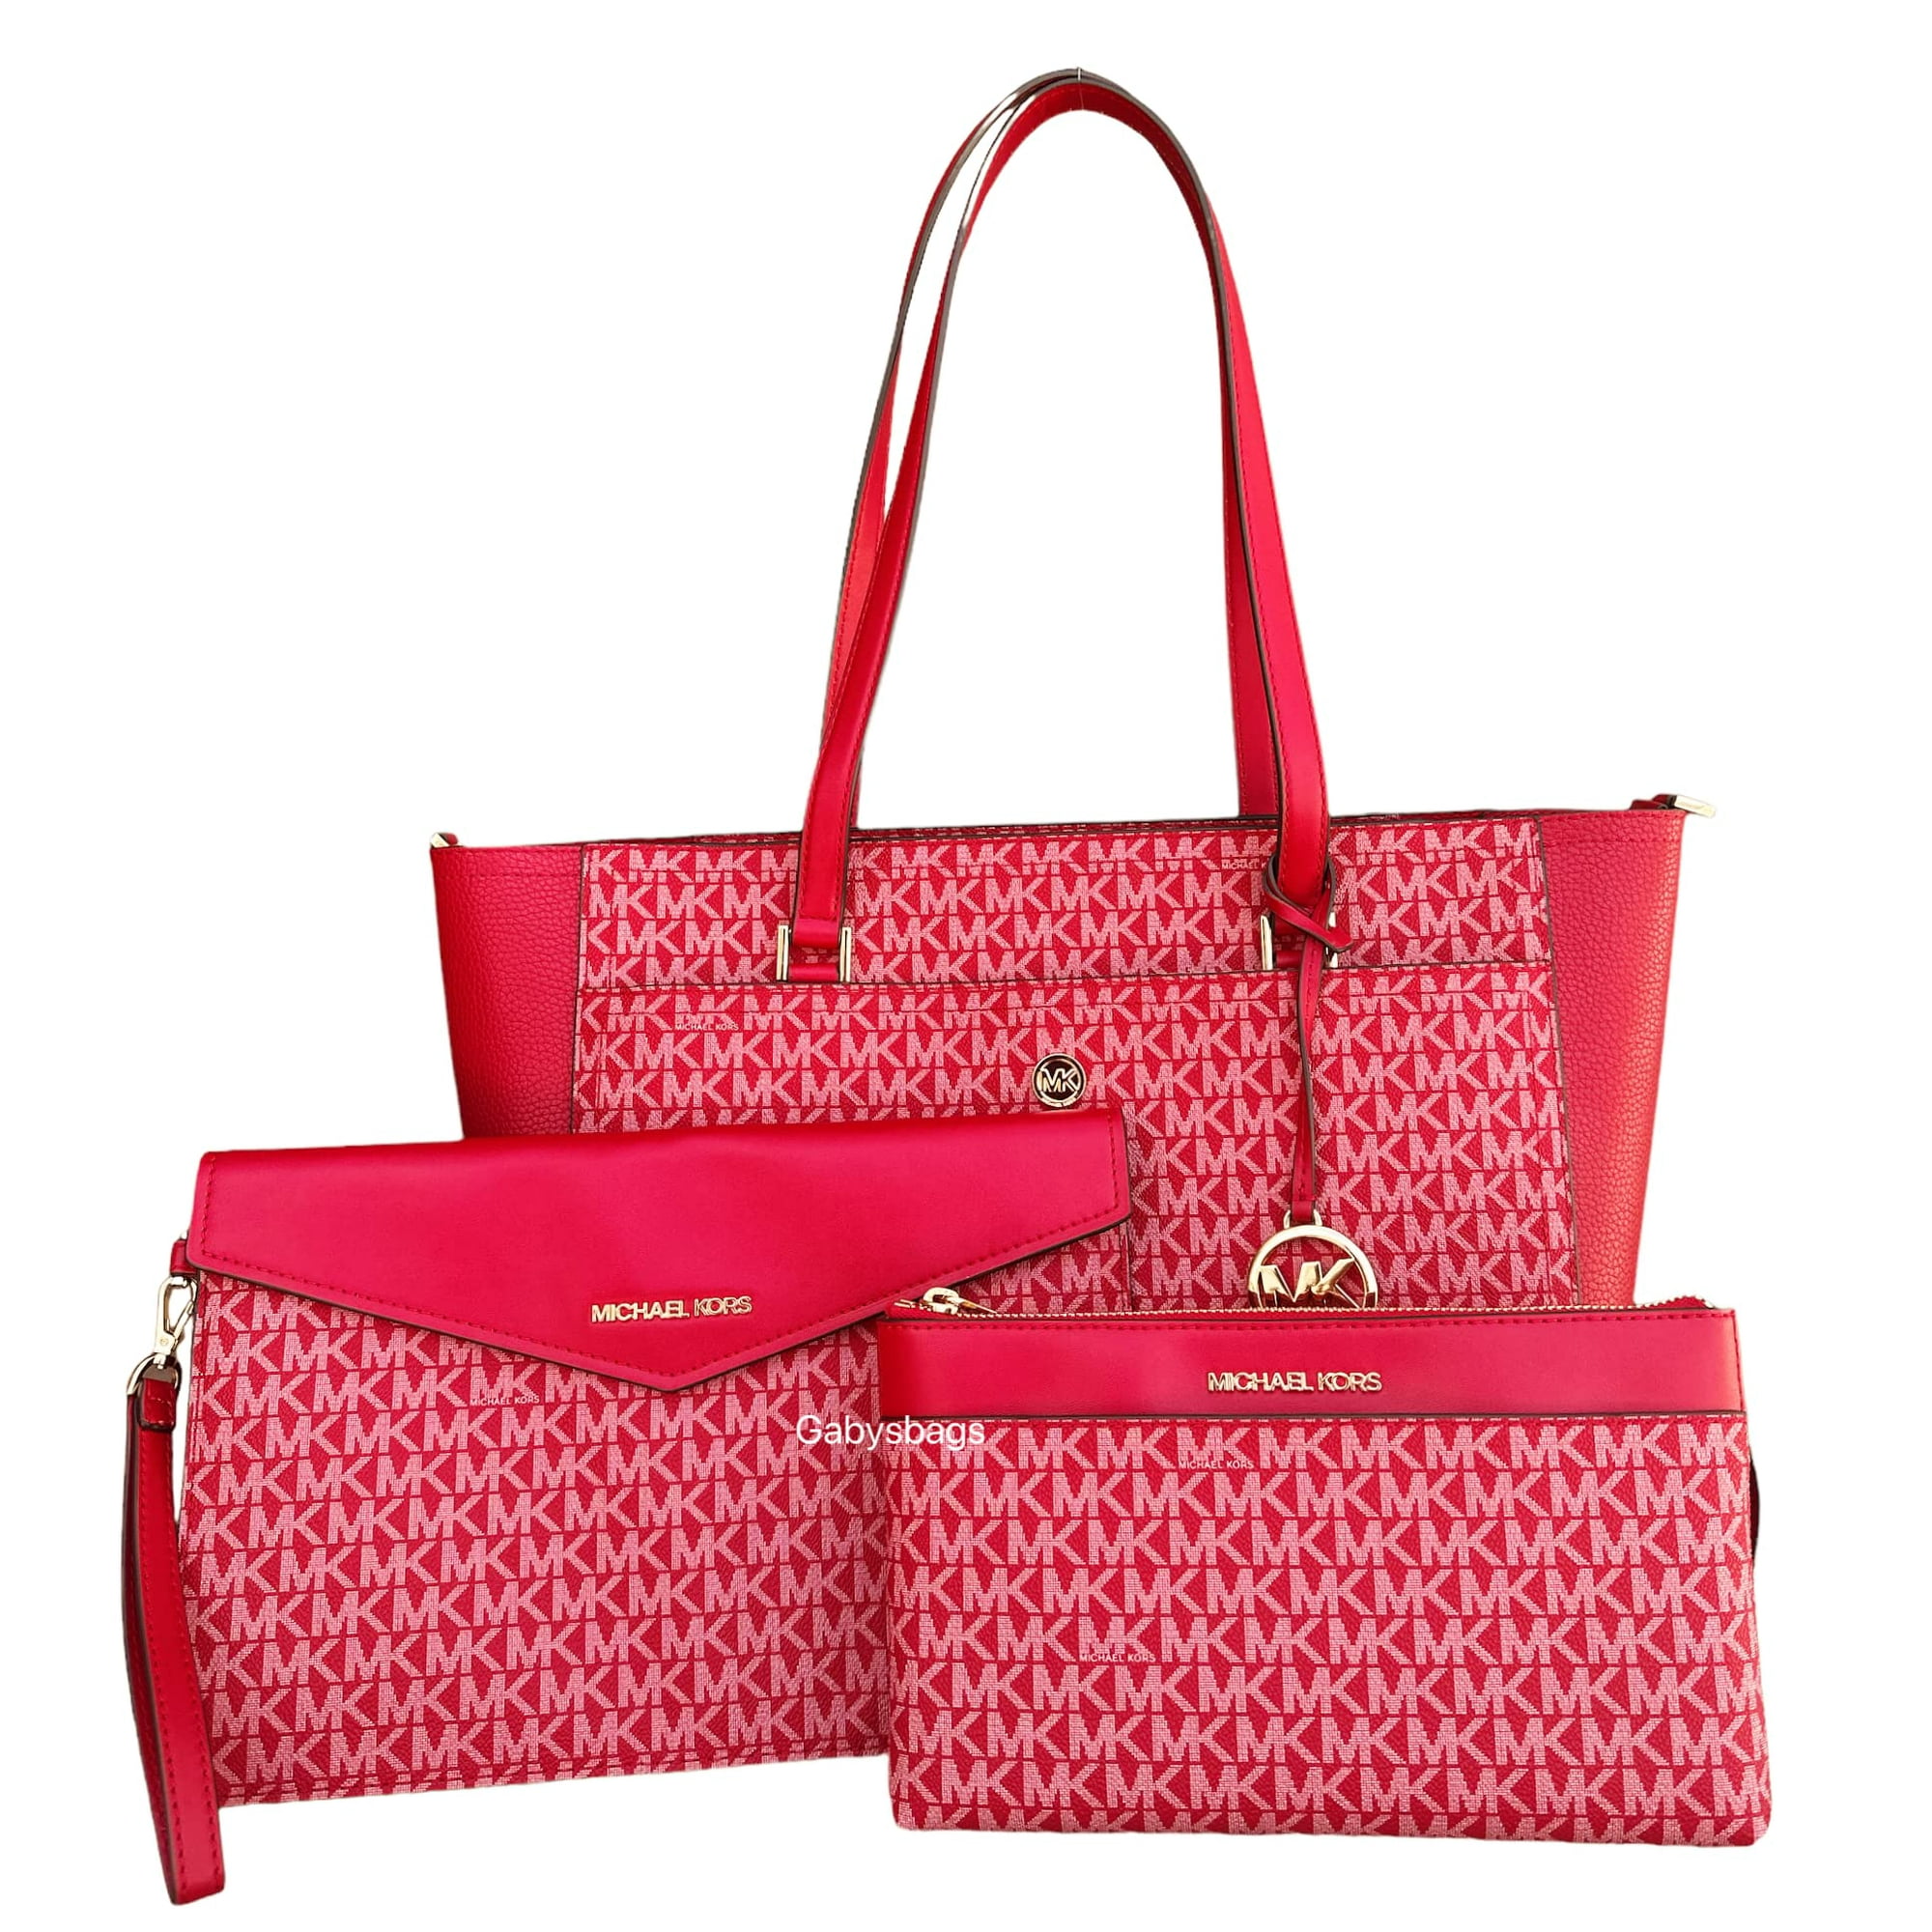 Michael Kors Maisie Large Pebbled Leather 3-IN-1 Tote Bag (Chili Red Multi)  | Walmart Canada